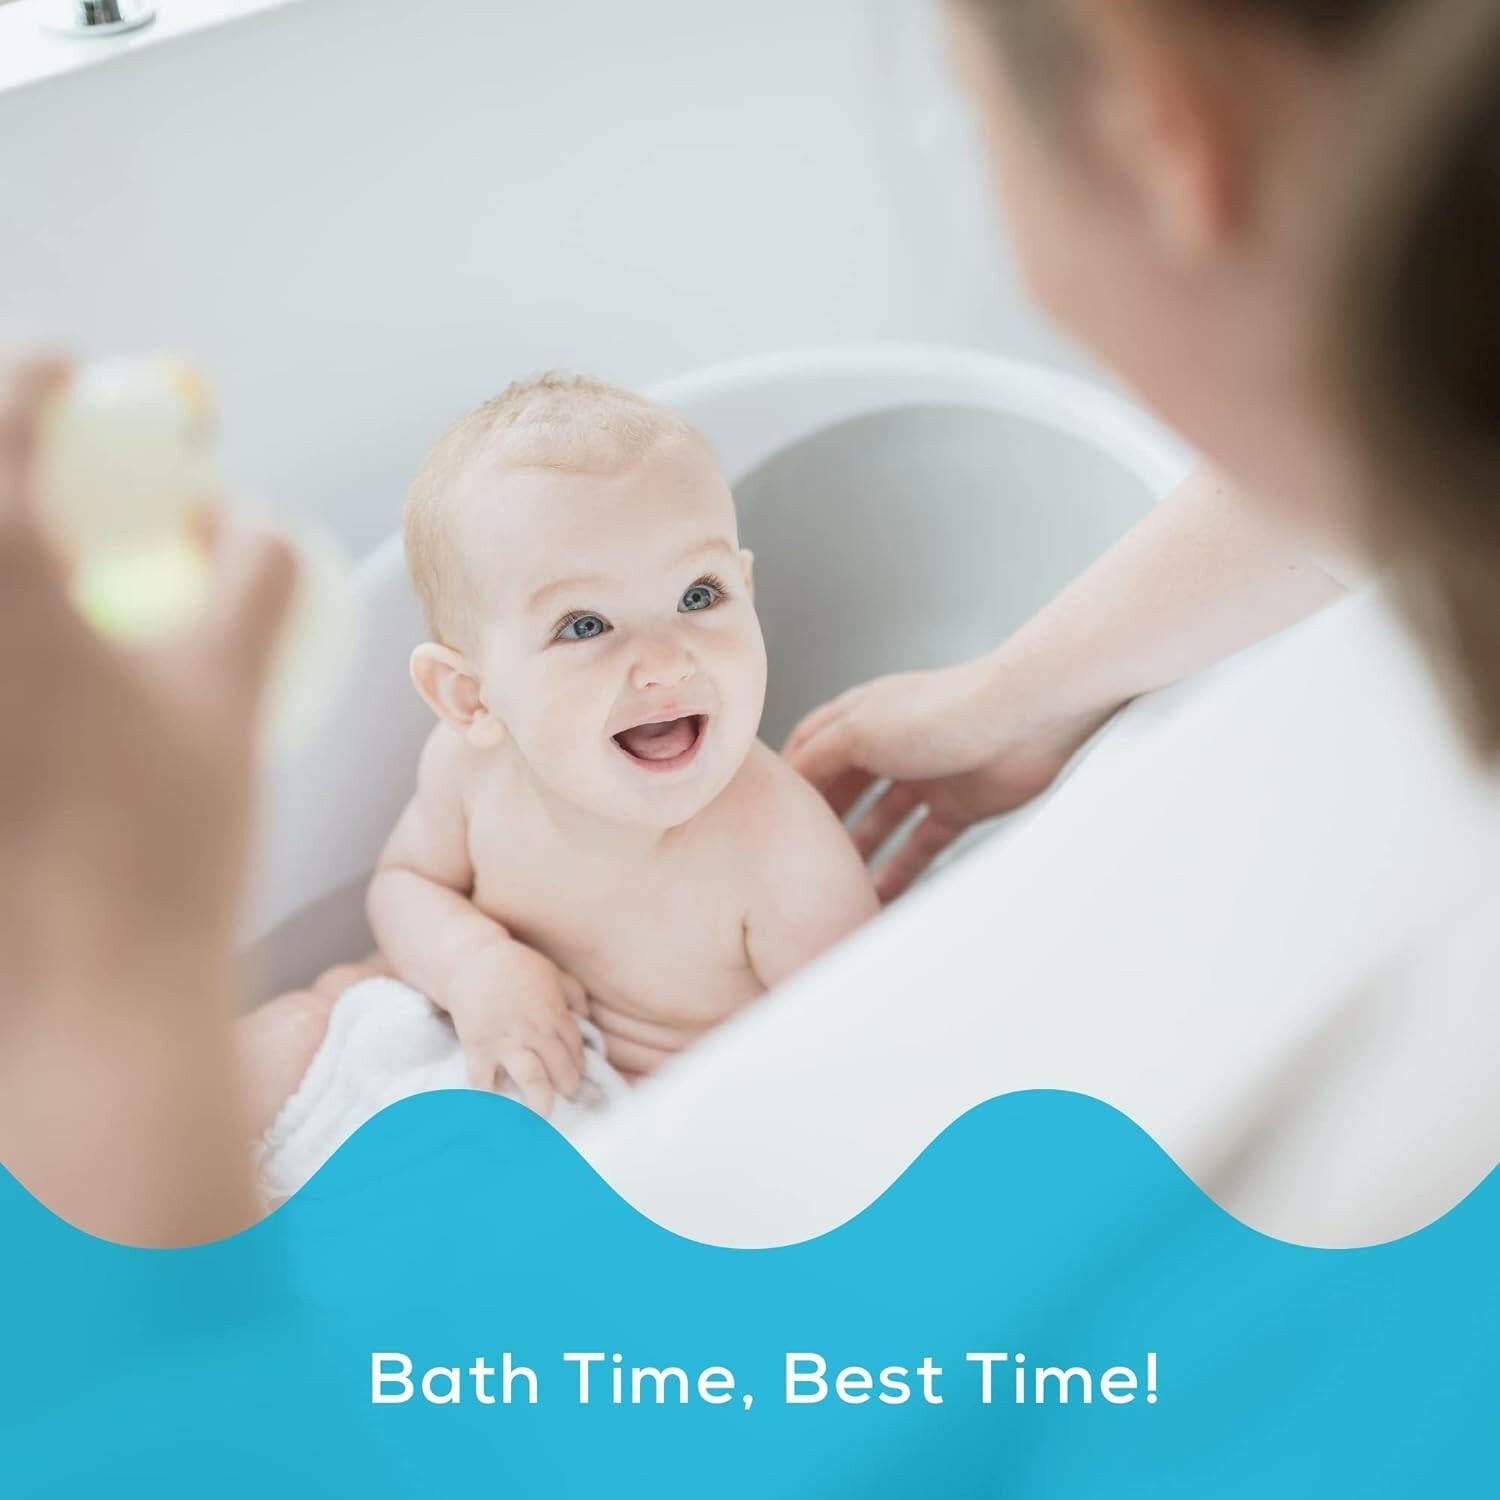 Angelcare 2-in-1 Baby Bathtub with Integrated Soft-Touch Support